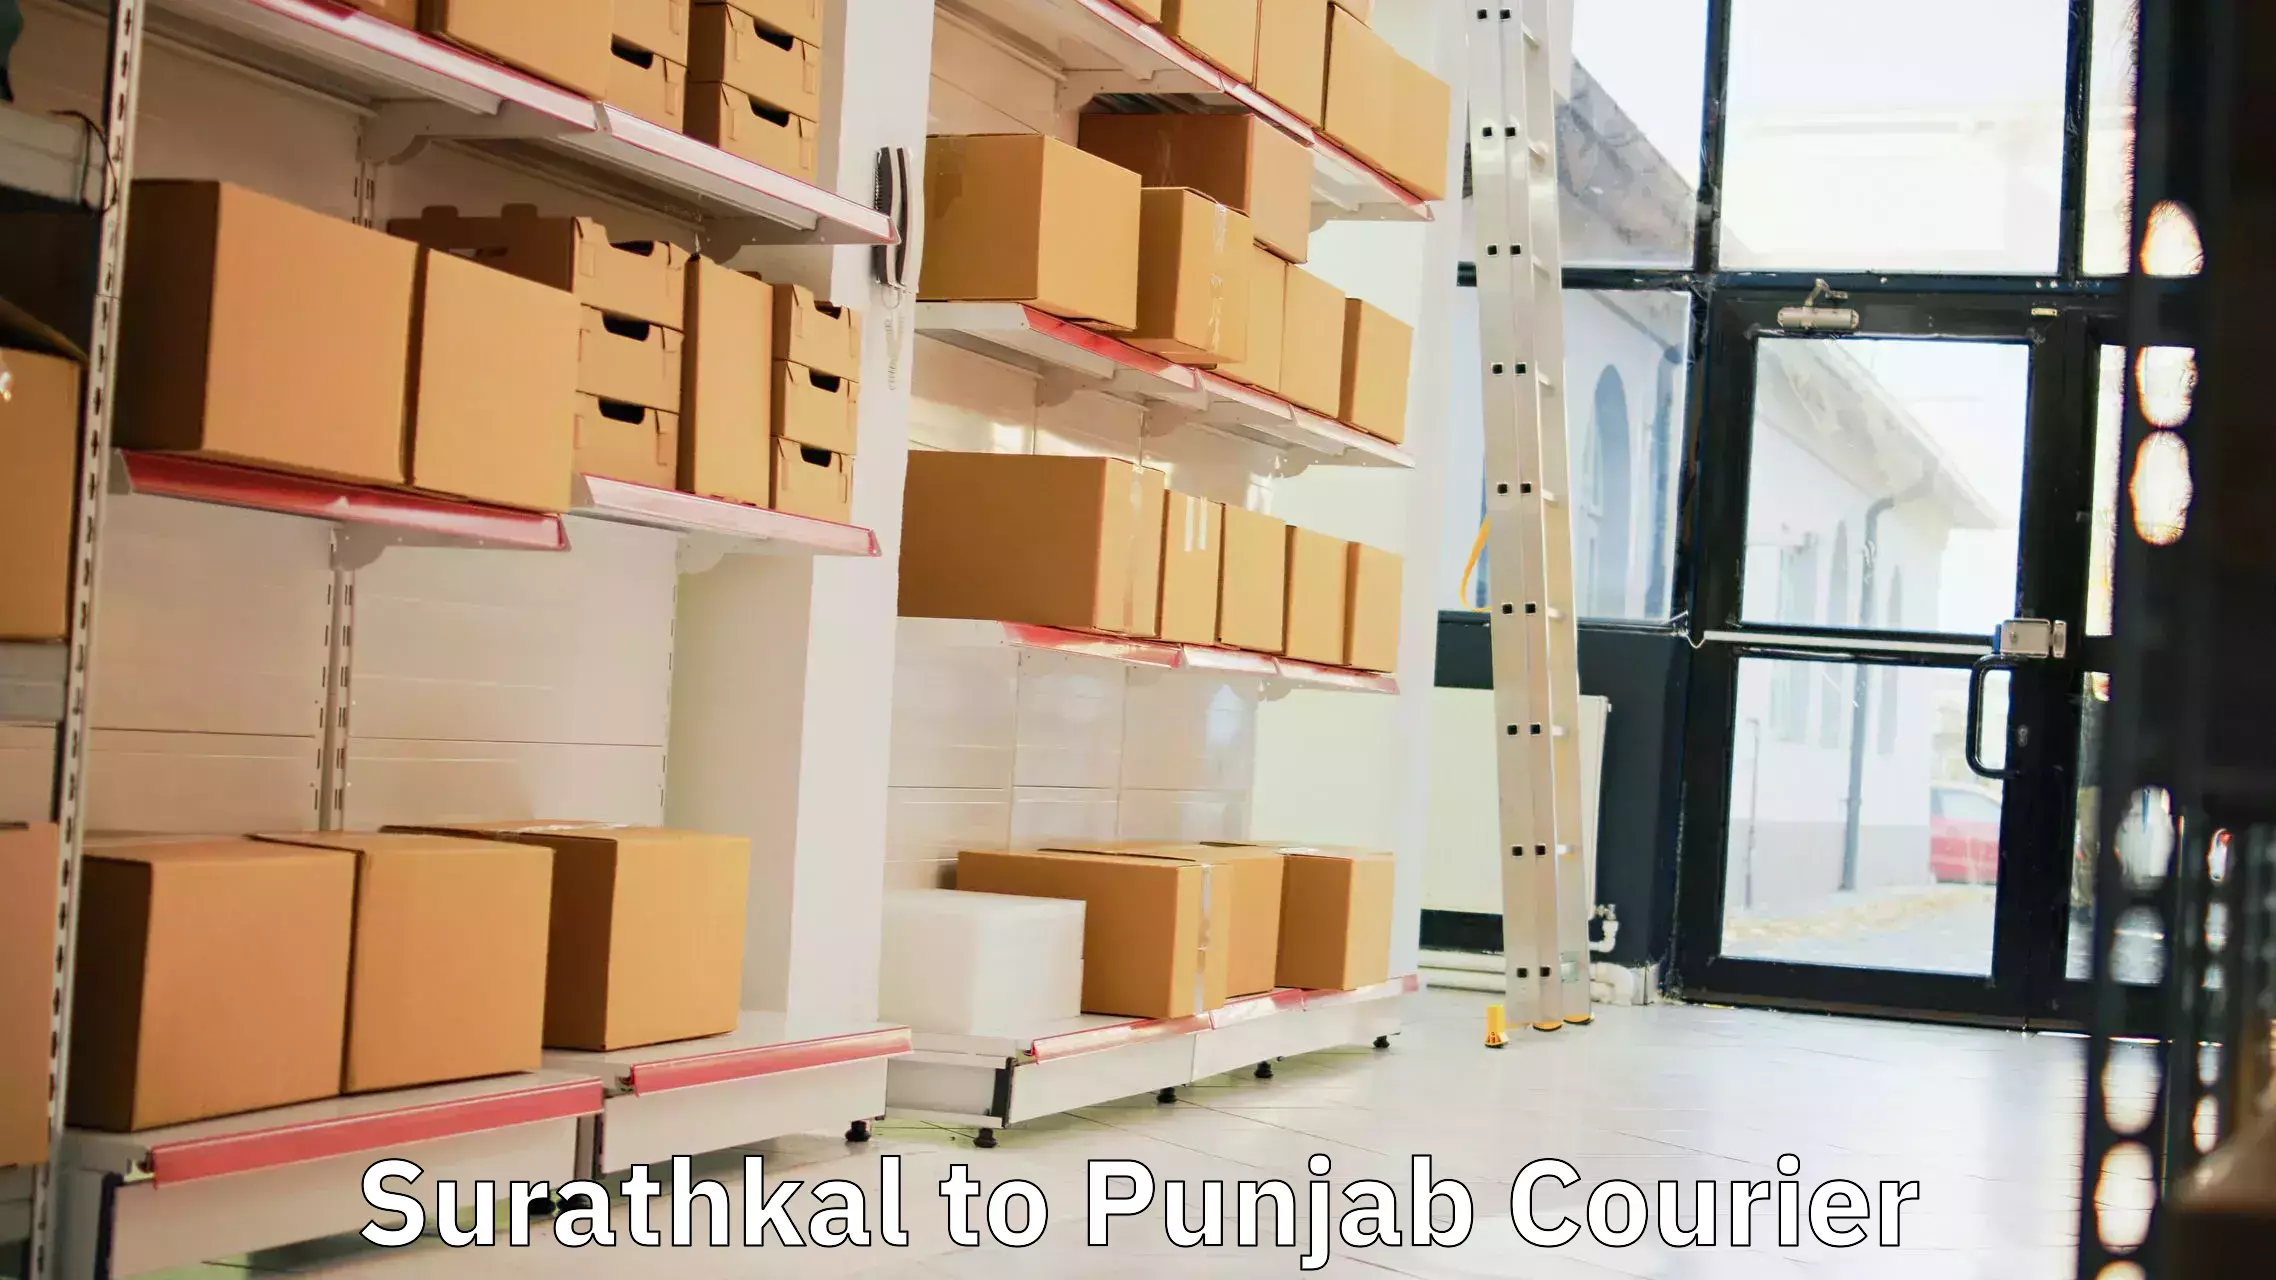 On-call courier service Surathkal to Faridkot